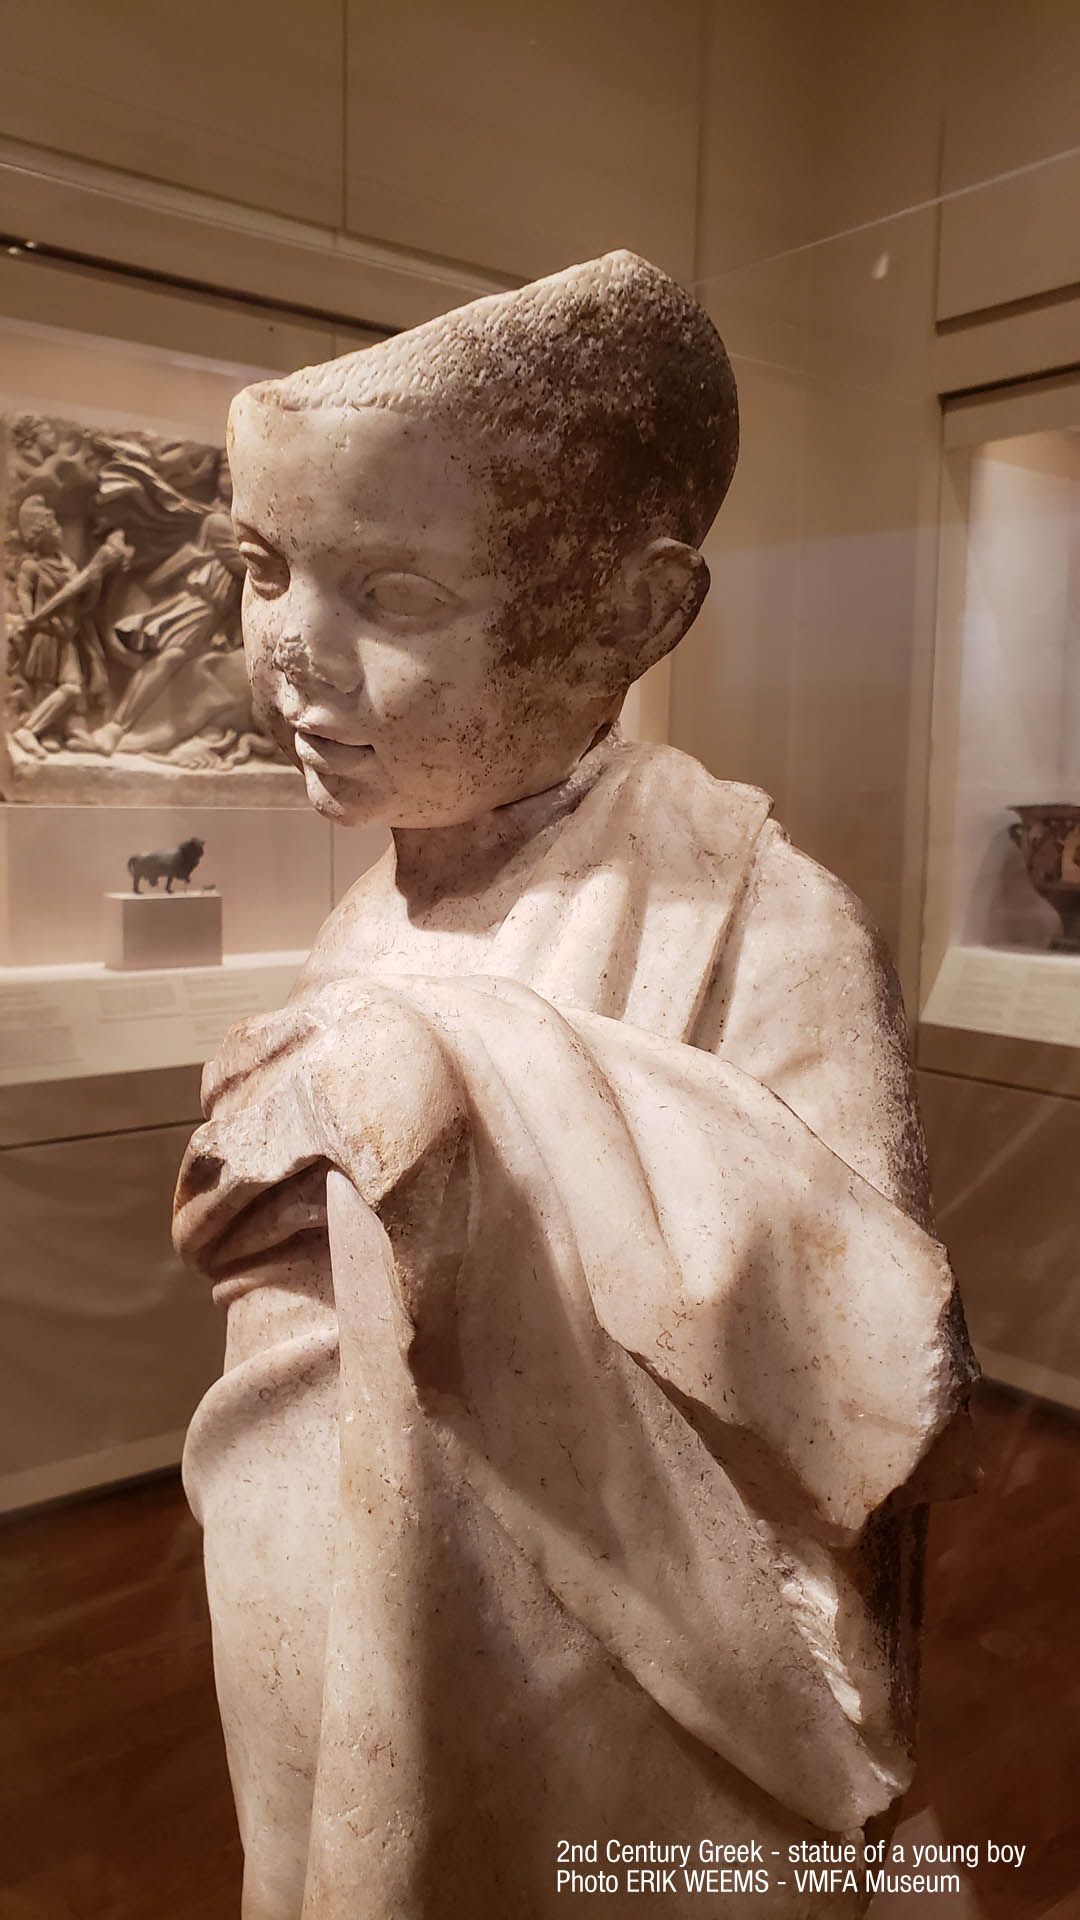 Statue of a young boy - Greek 2nd century